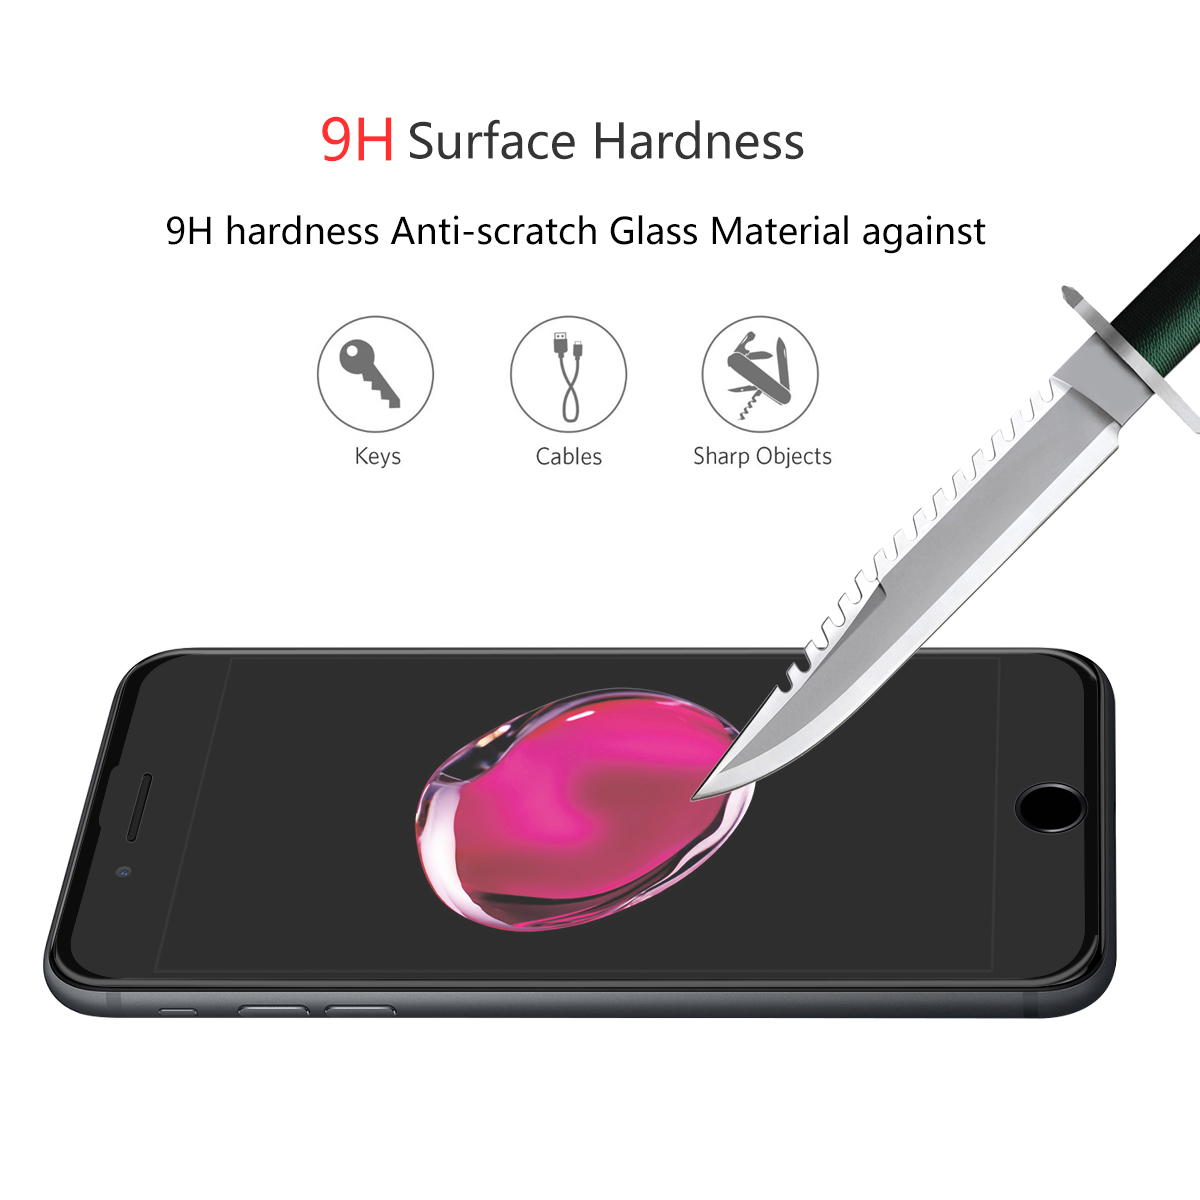 Enkay-02mm-6D-Curved-Edge-Soft-TPU-Tempered-Glass-Screen-Protector-For-iPhone-6-Plus6s-Plus-1335393-3